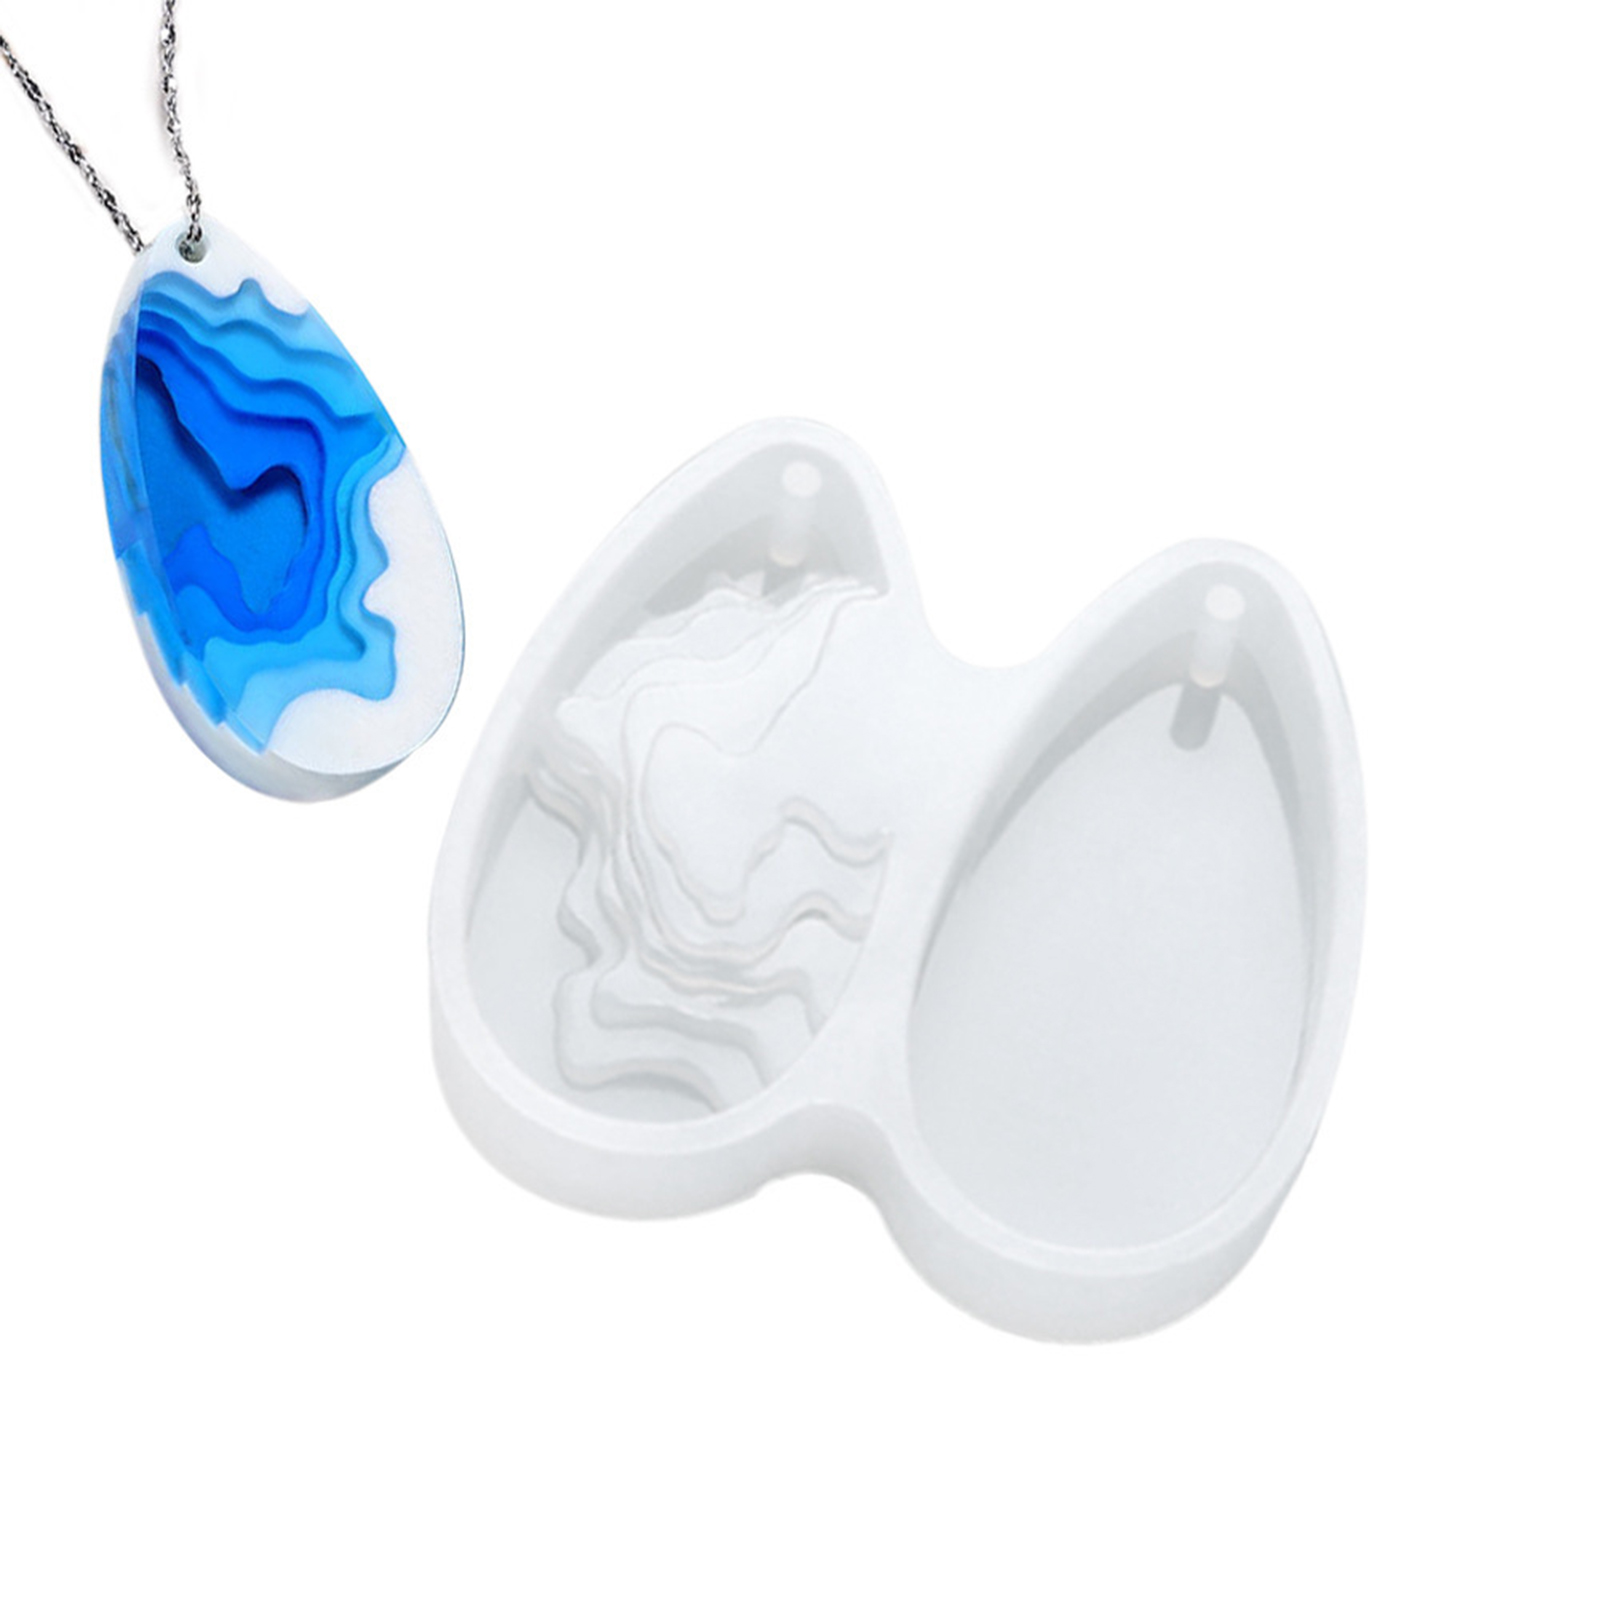 Picture of Silicone Resin Mold For Jewelry Making Pendant Oval White 5.2cm x 4.5cm, 1 Piece